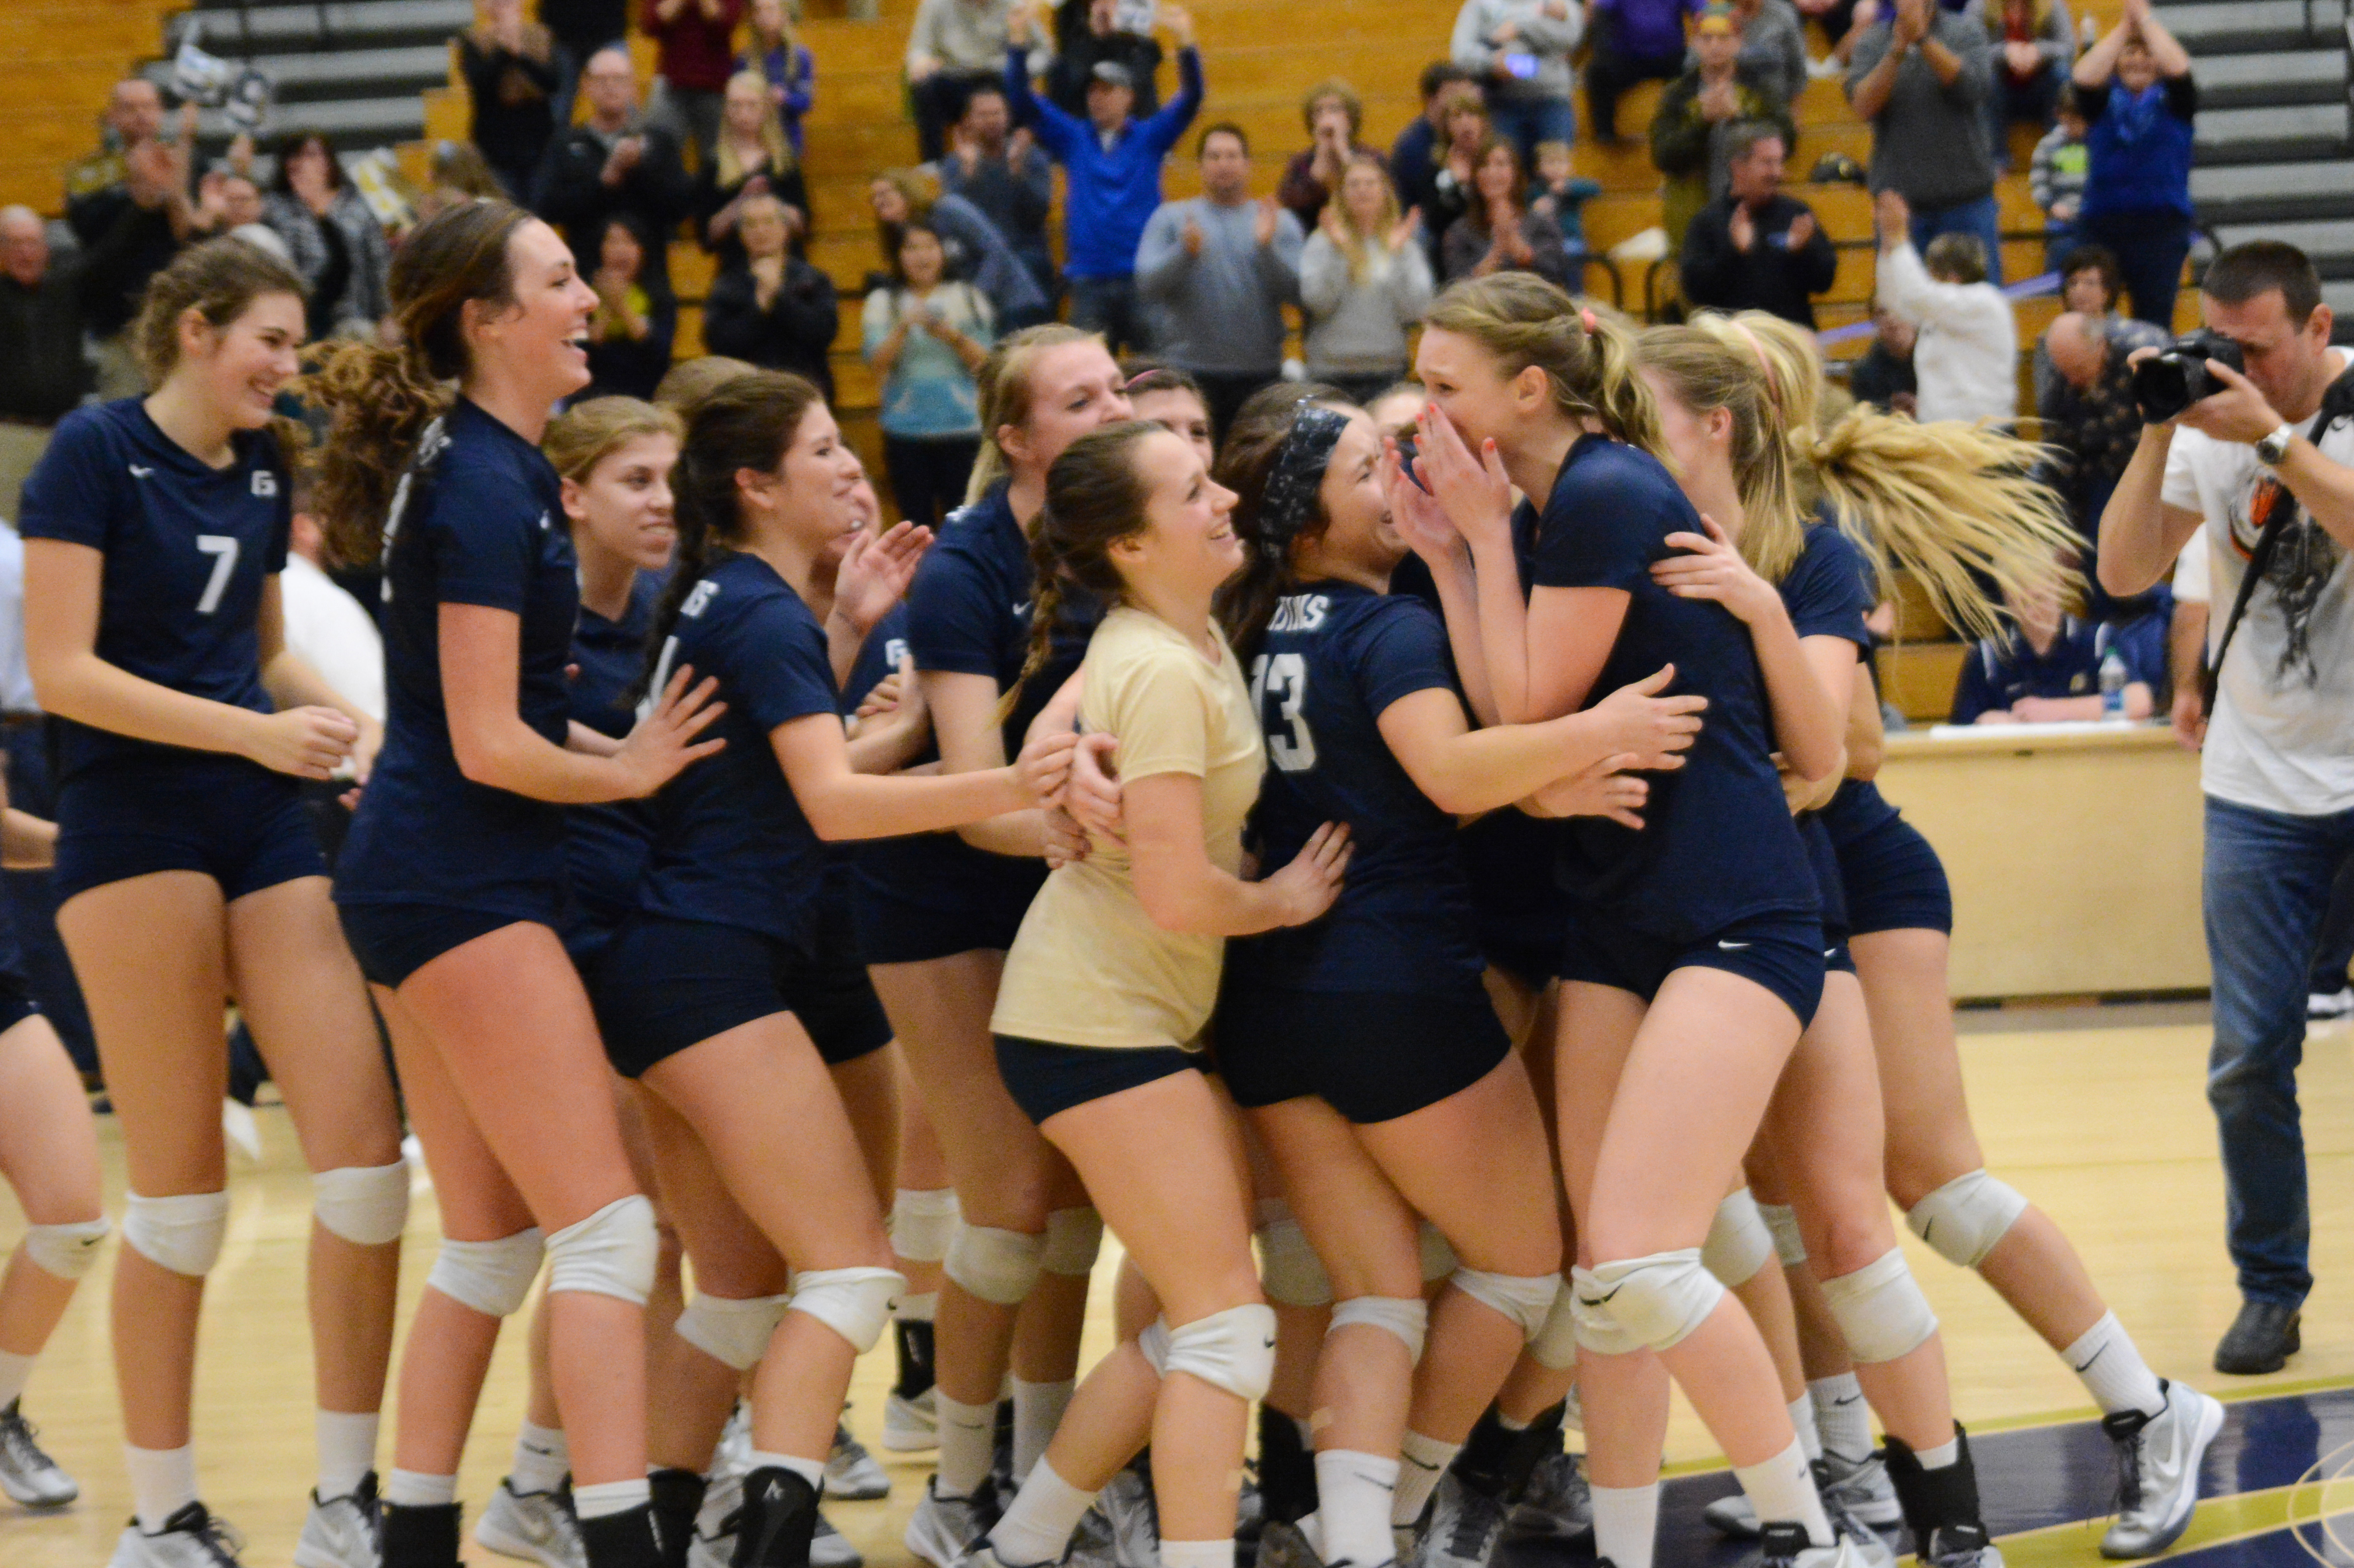 Volleyball 2015: The Season in Pictures